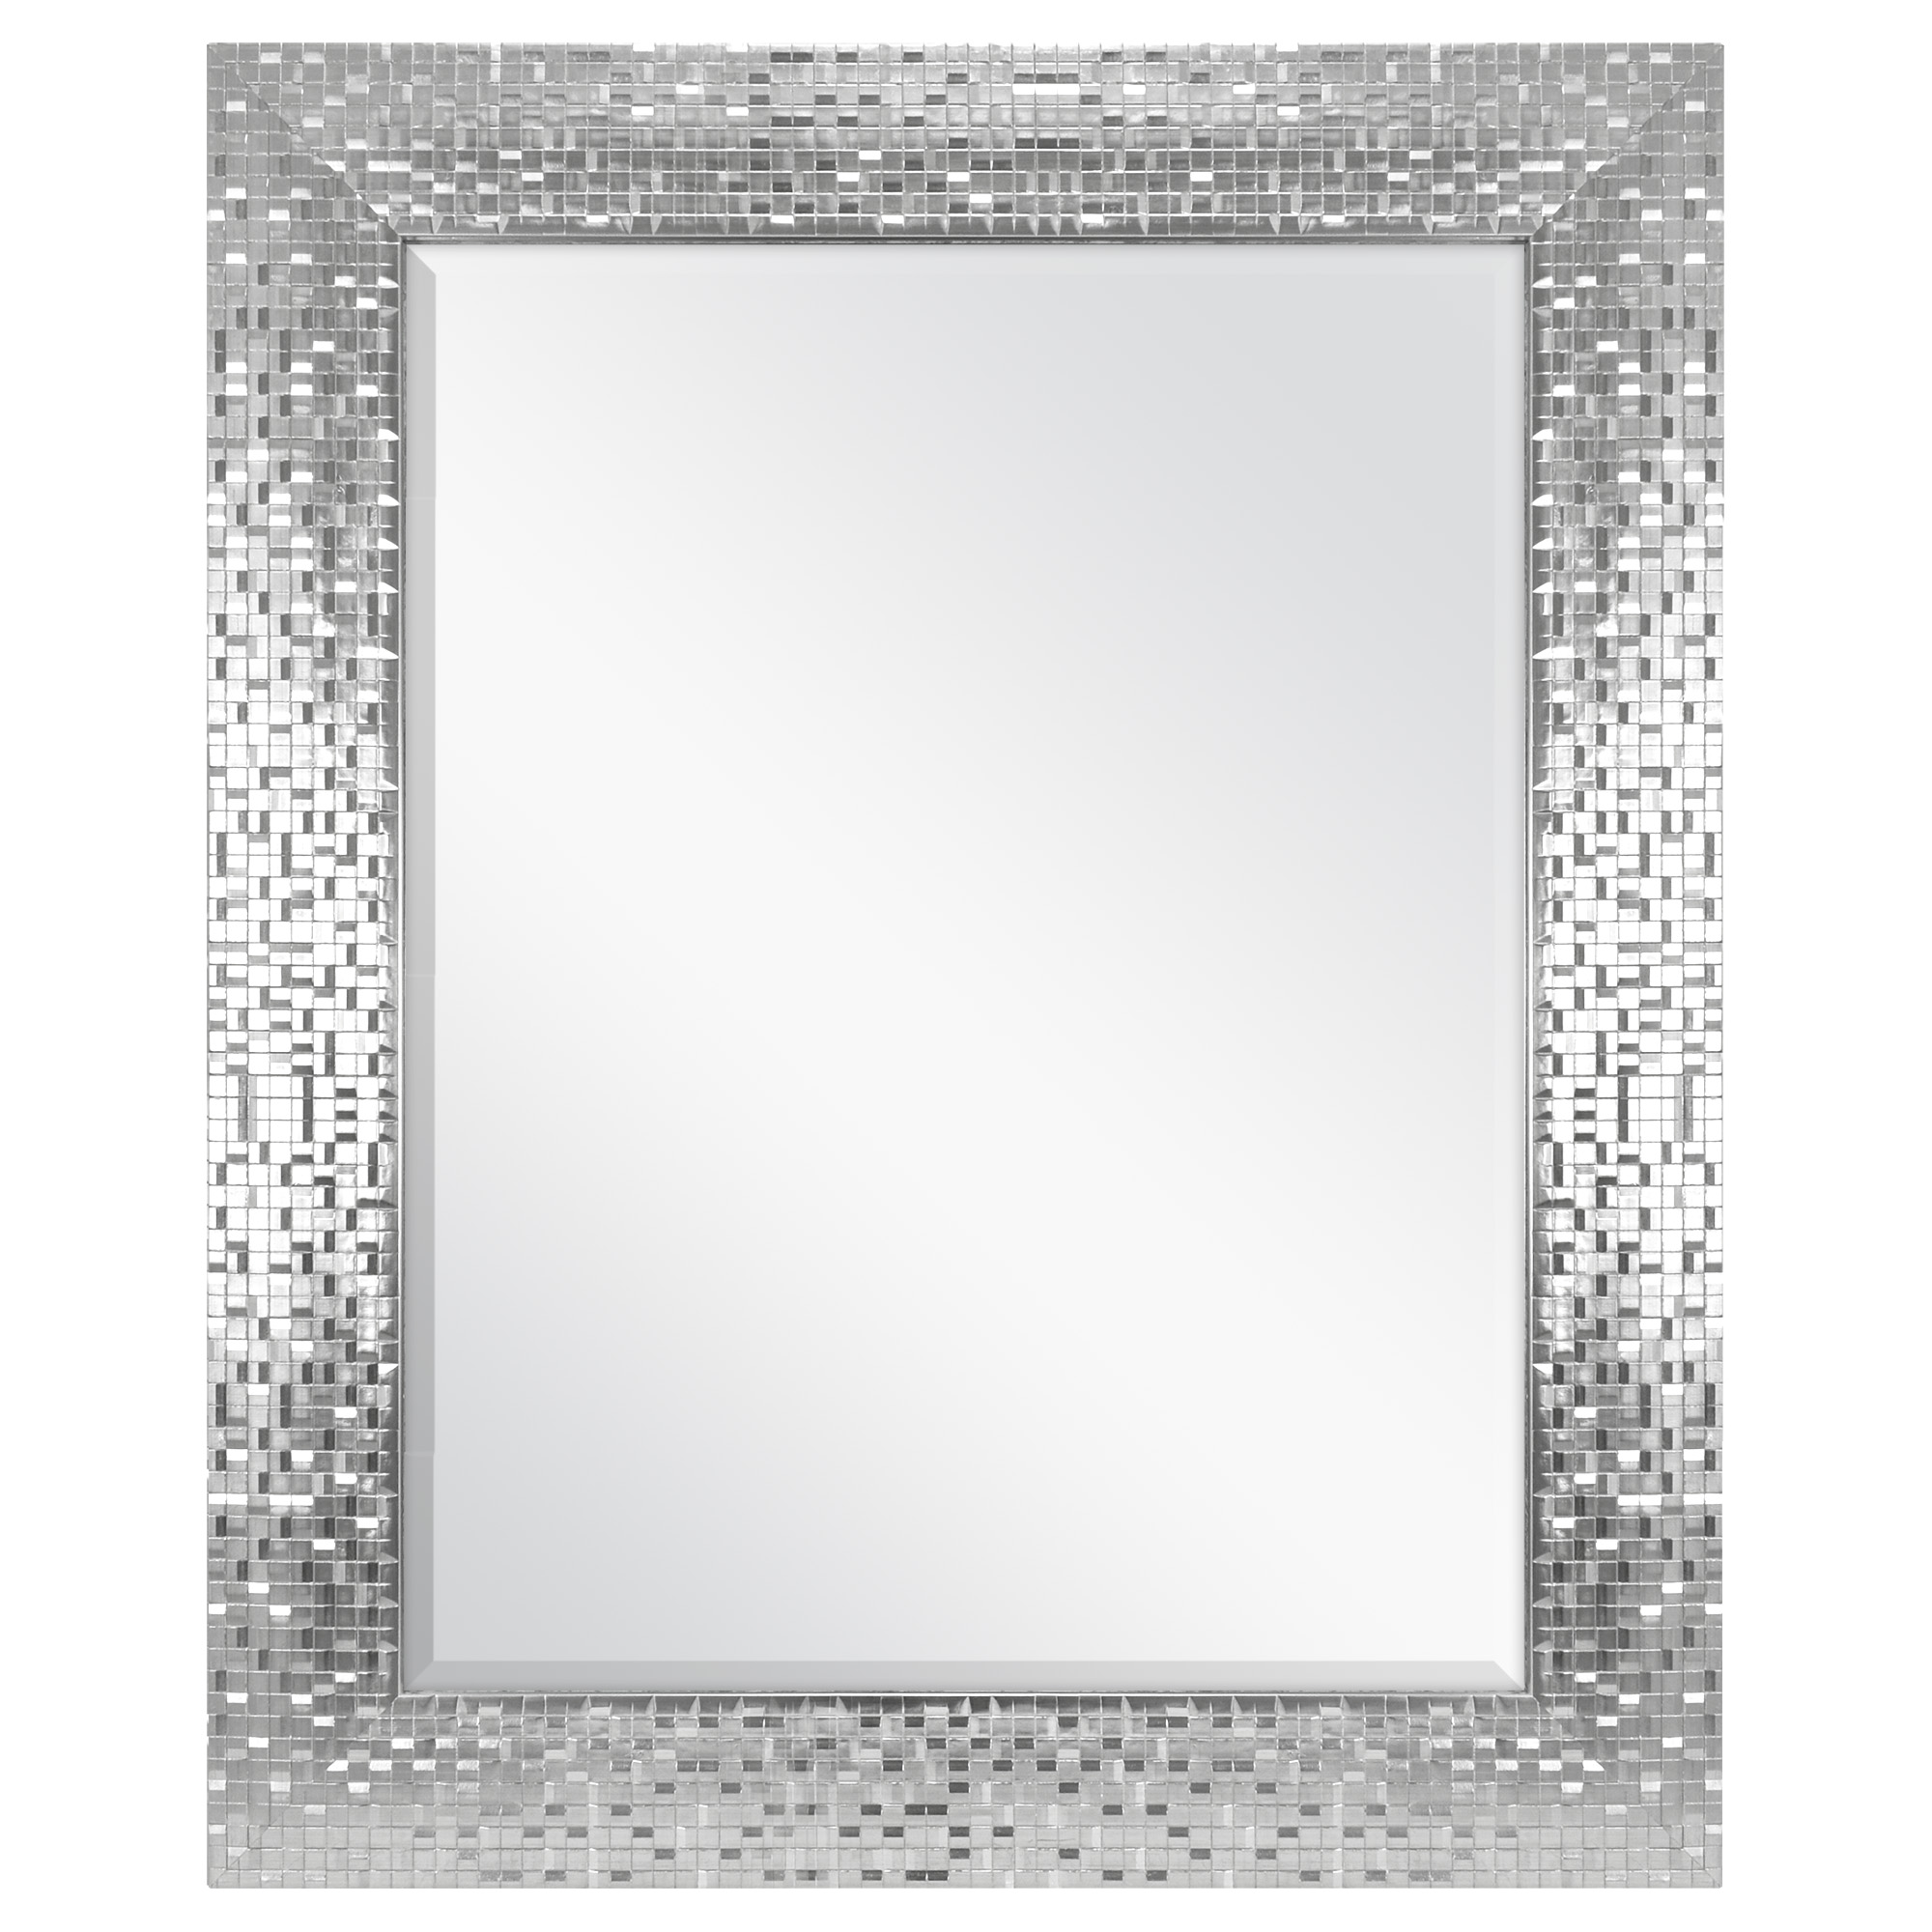 Better Homes & Gardens Silver Glam Mosaic Tile Wall Mirror, 23x28 Inch - image 1 of 7